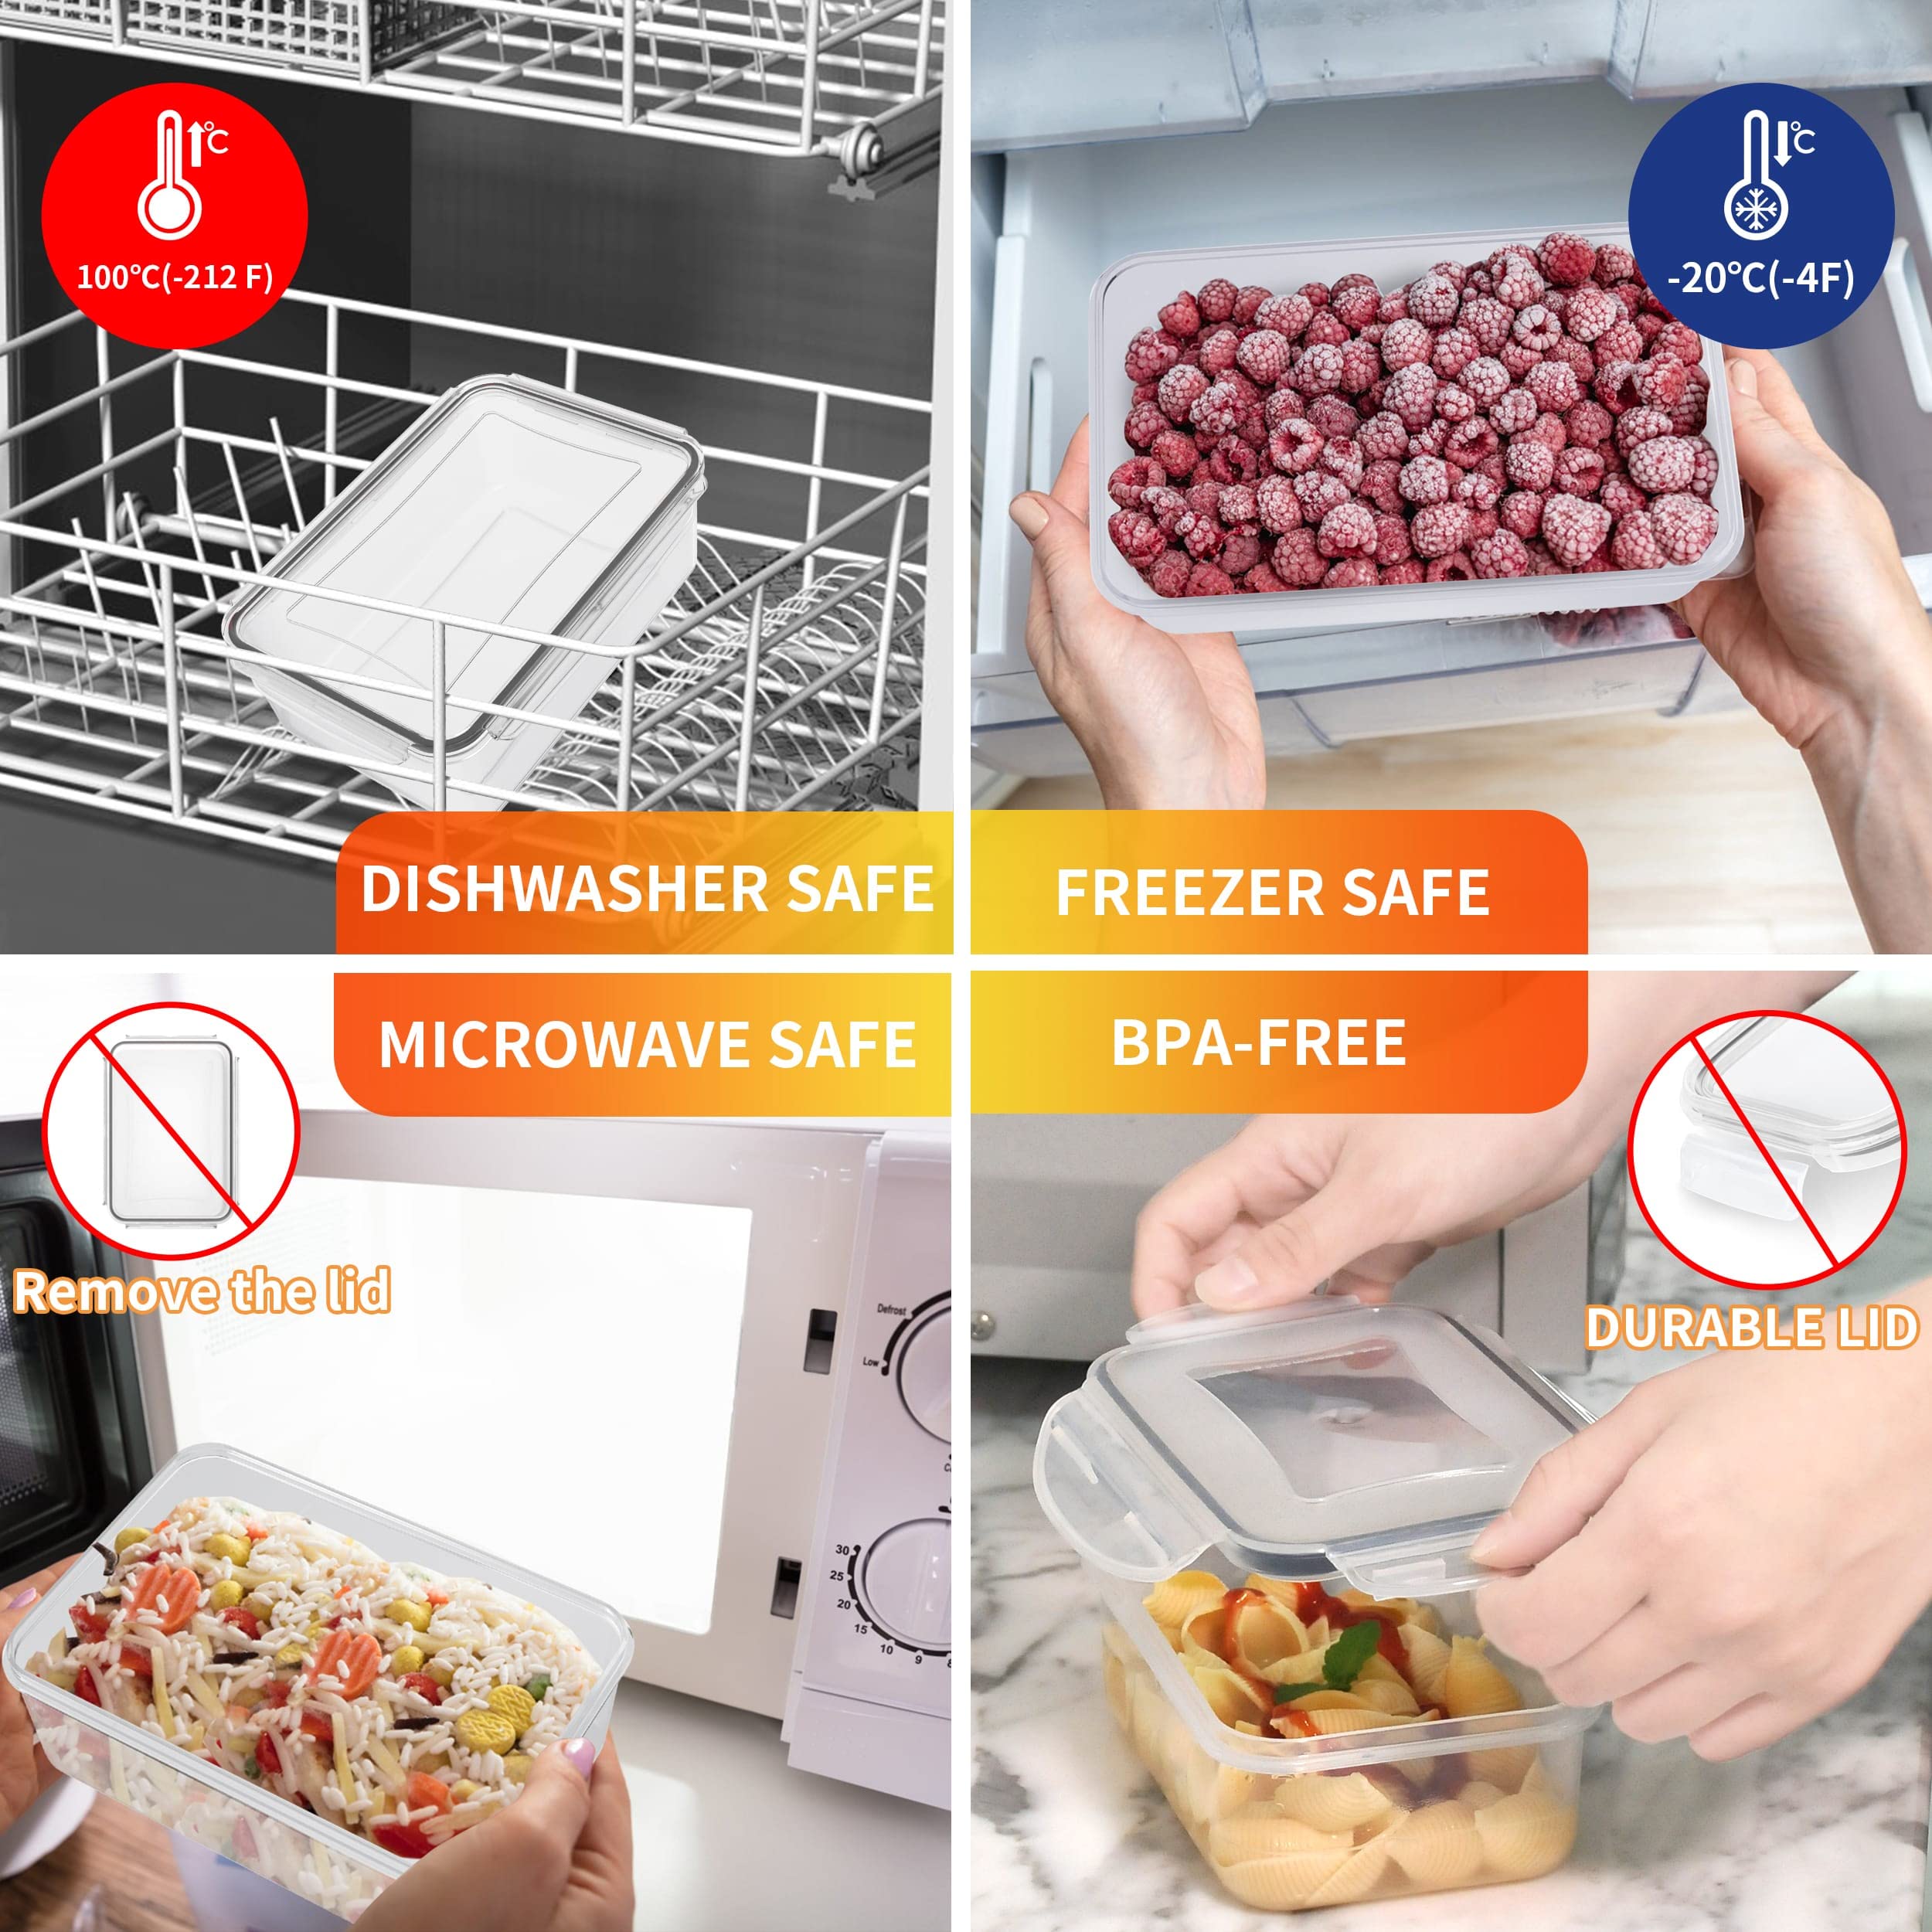 GEIKR 40 PCS Plastic Food Storage Containers with Lids Airtight, BPA-Free Leakproof Meal Prep Containers Reusable,Microwave & Dishwasher & Freezer Safe,Includes Labels & Pen